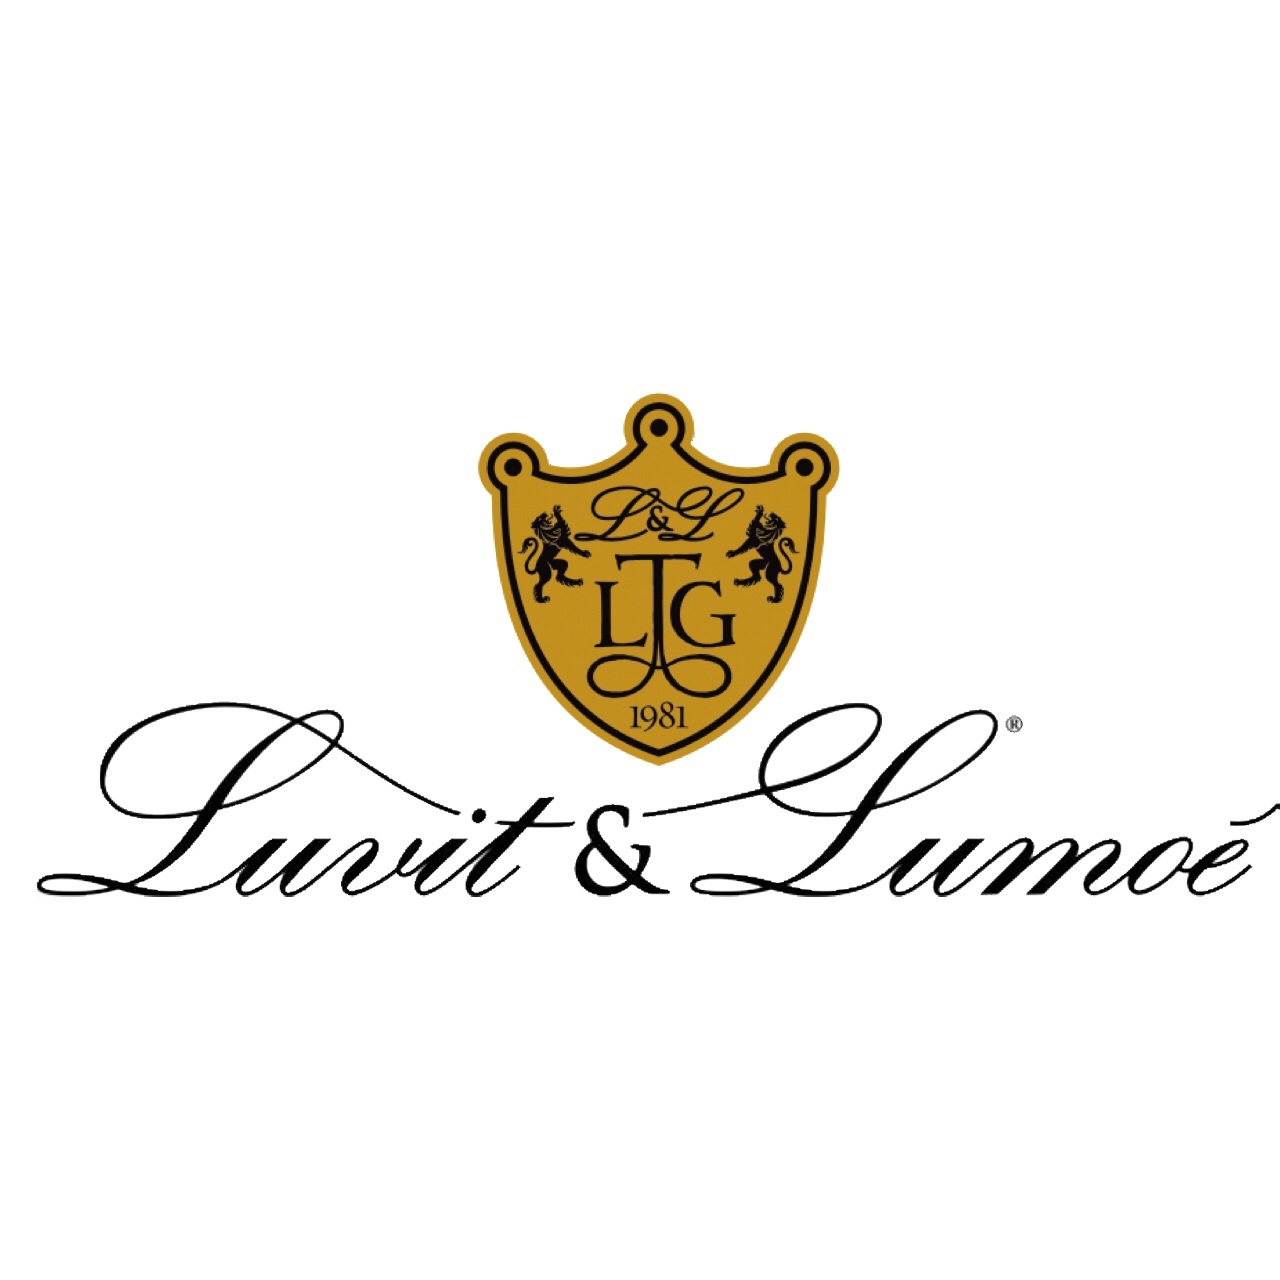 Logo of Luvit & Lumoè Wines Spirits And Beer - Importers In Brighton, East Sussex